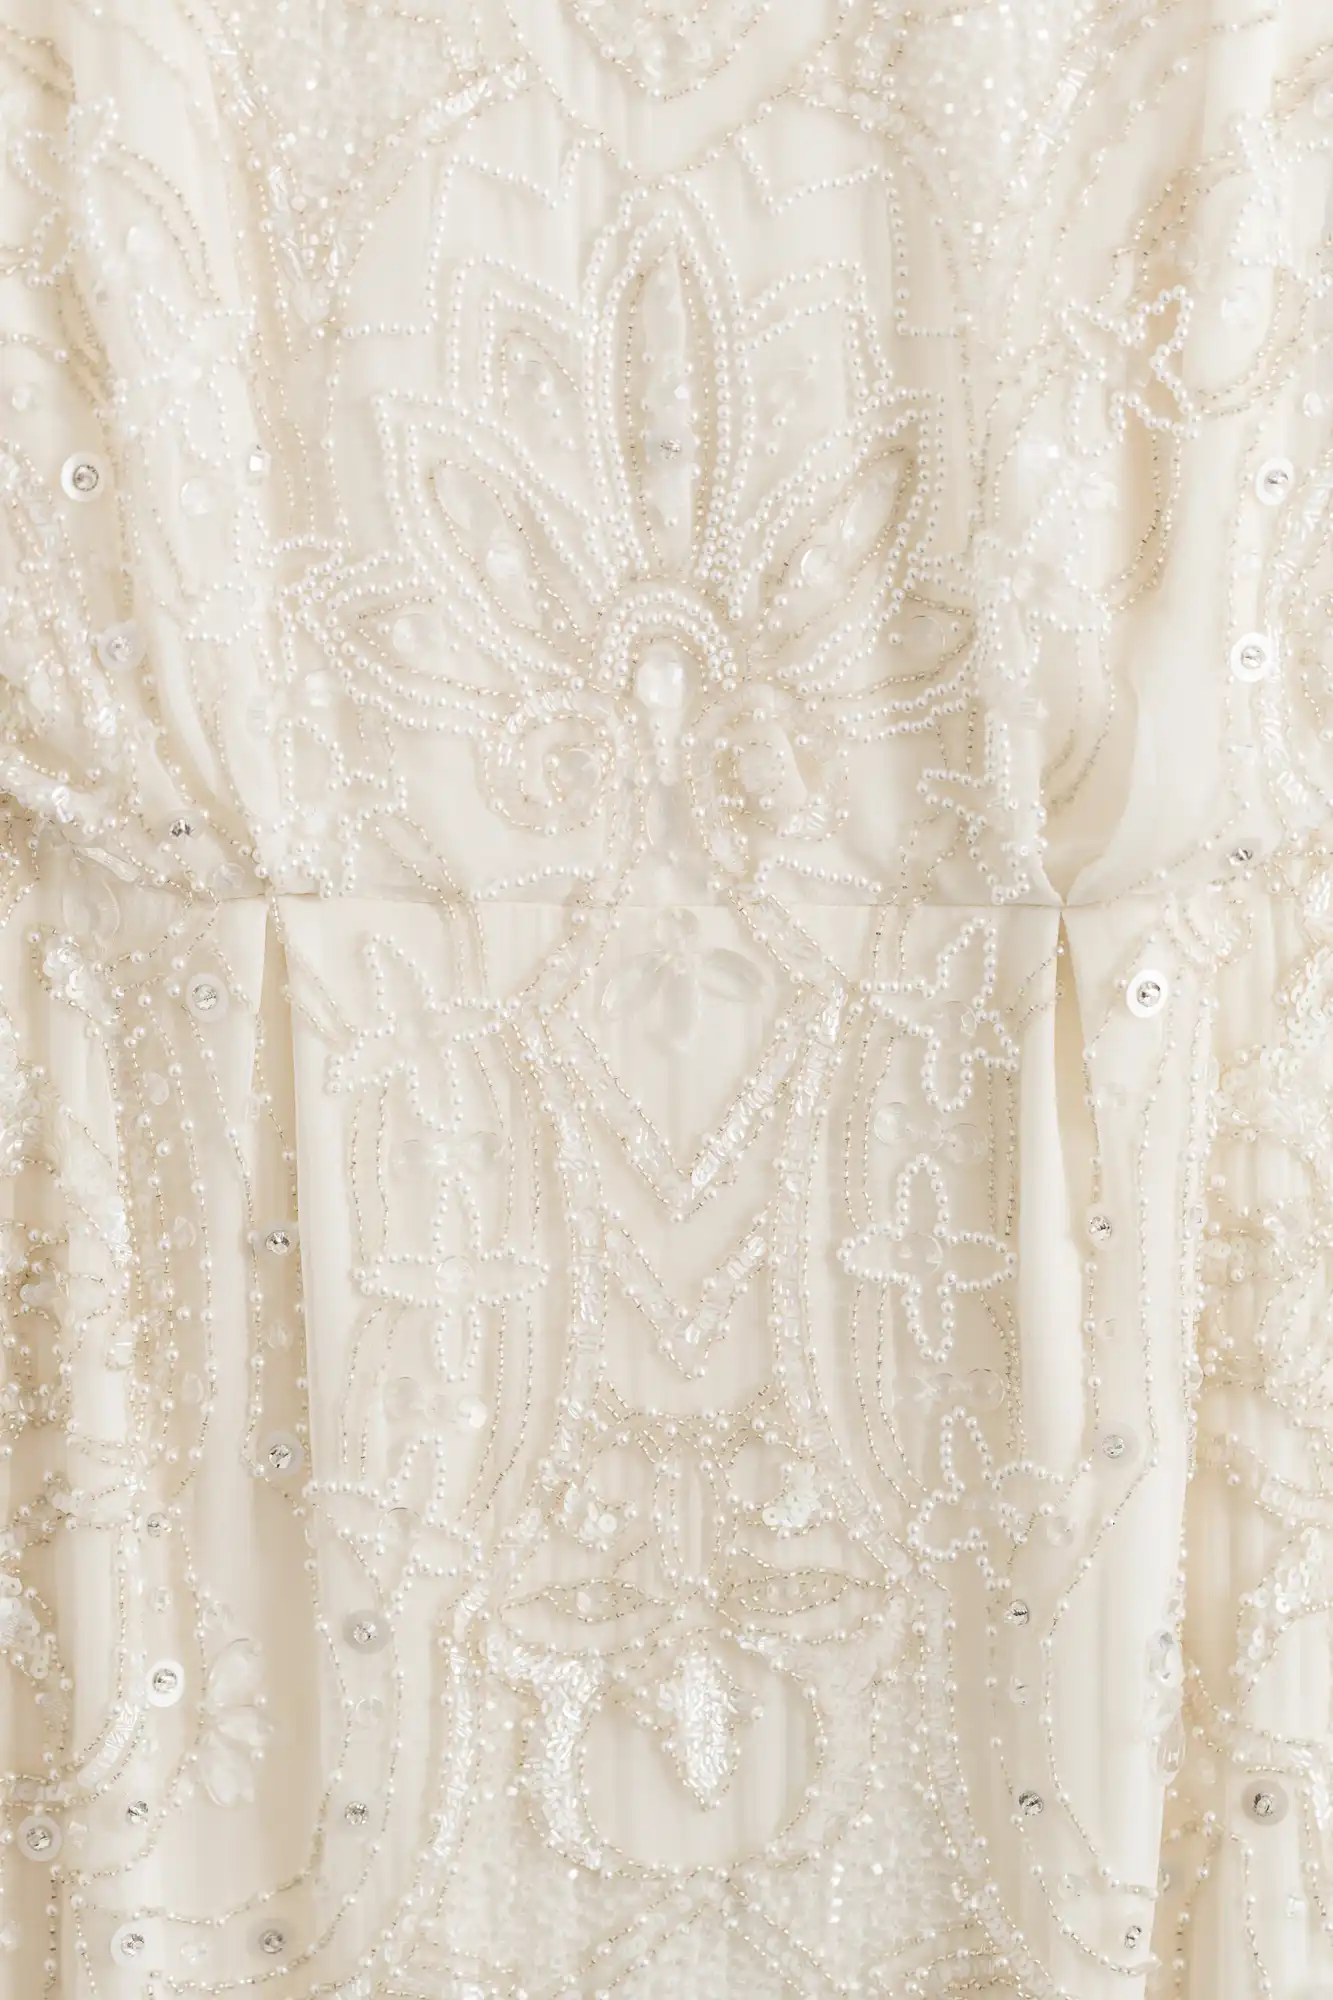 Close-up of an intricate, beaded white dress featuring symmetrical floral embellishments.